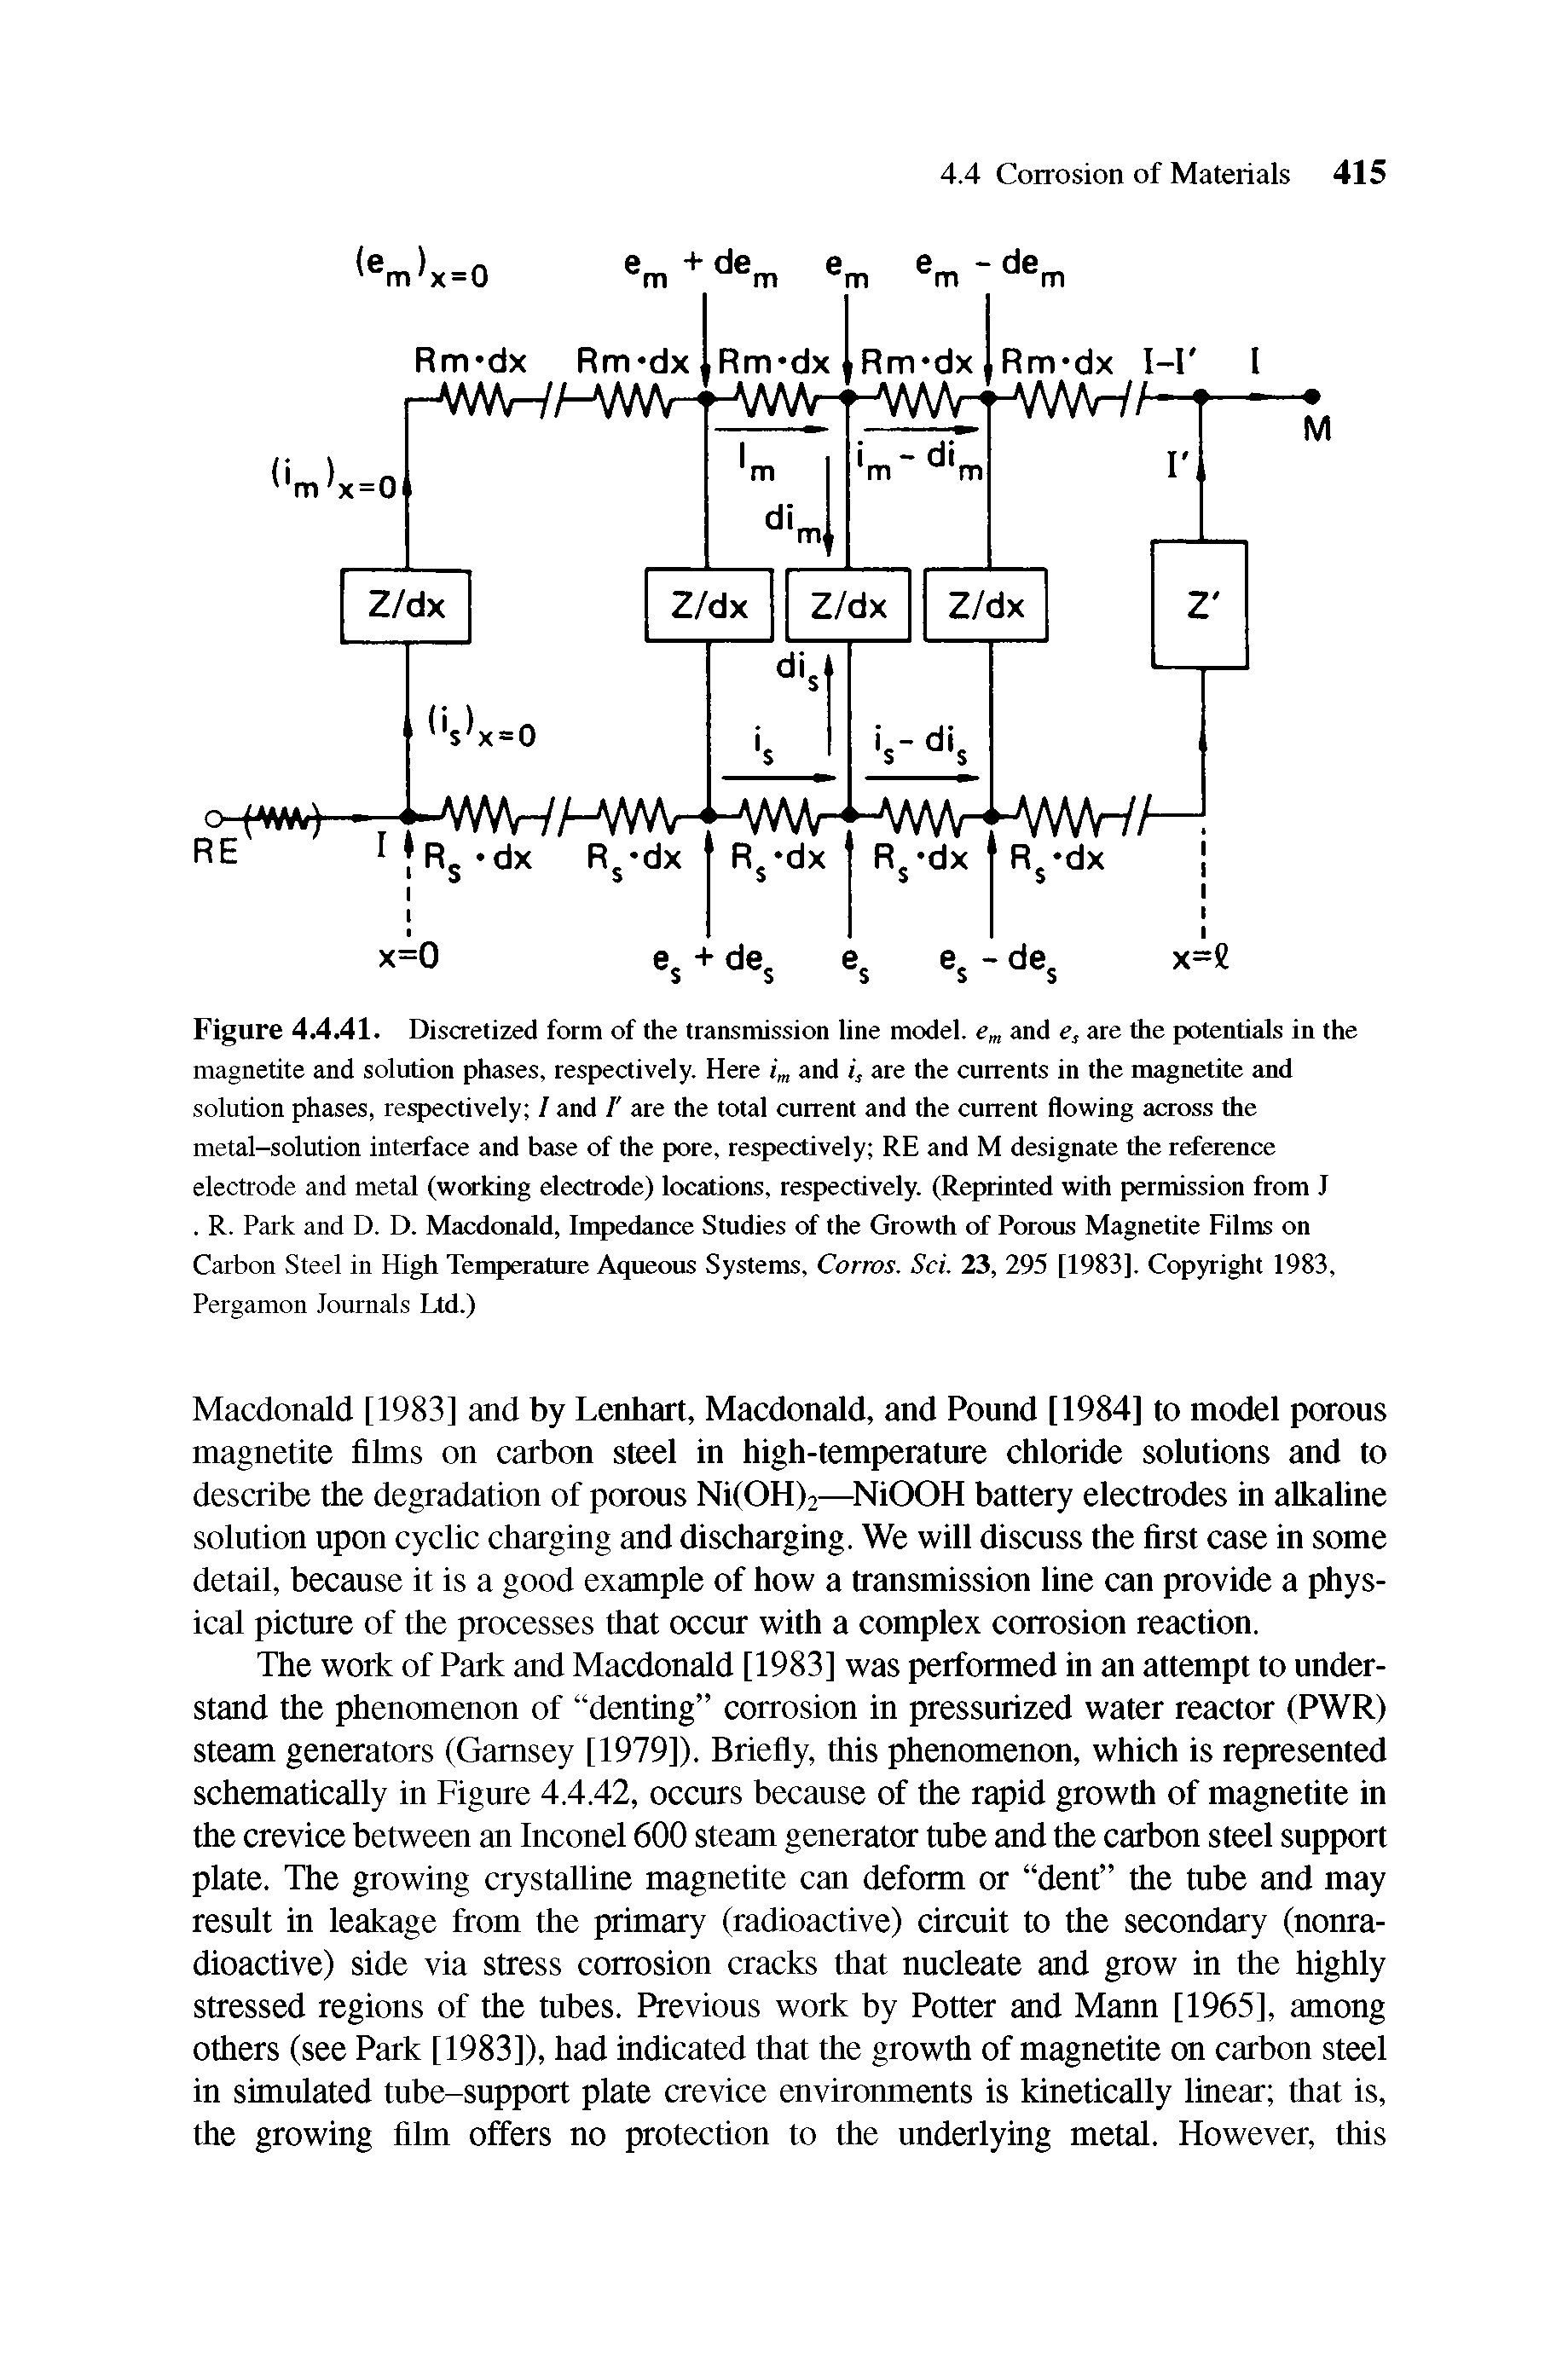 Figure 4.4.41. Disaetized form of the transmission line model. e and e, are the potentials in the magnetite and solution phases, respectively. Here i and i, are the currents in the magnetite and solution phases, respectively I and / are the total current and the current flowing across the metal-solution interface and base of the pore, respectively RE and M designate the reference electrode and metal (working electrode) locations, respectively. (Reprinted with permission from J. R. Park and D. D. Macdonald, Impedance Studies of the Growth of Porous Magnetite Films on Carbon Steel in High Temperature Aqueous Systems, Corros. Sci. 23, 295 [1983]. Copyright 1983, Pergamon Journals Ltd.)...